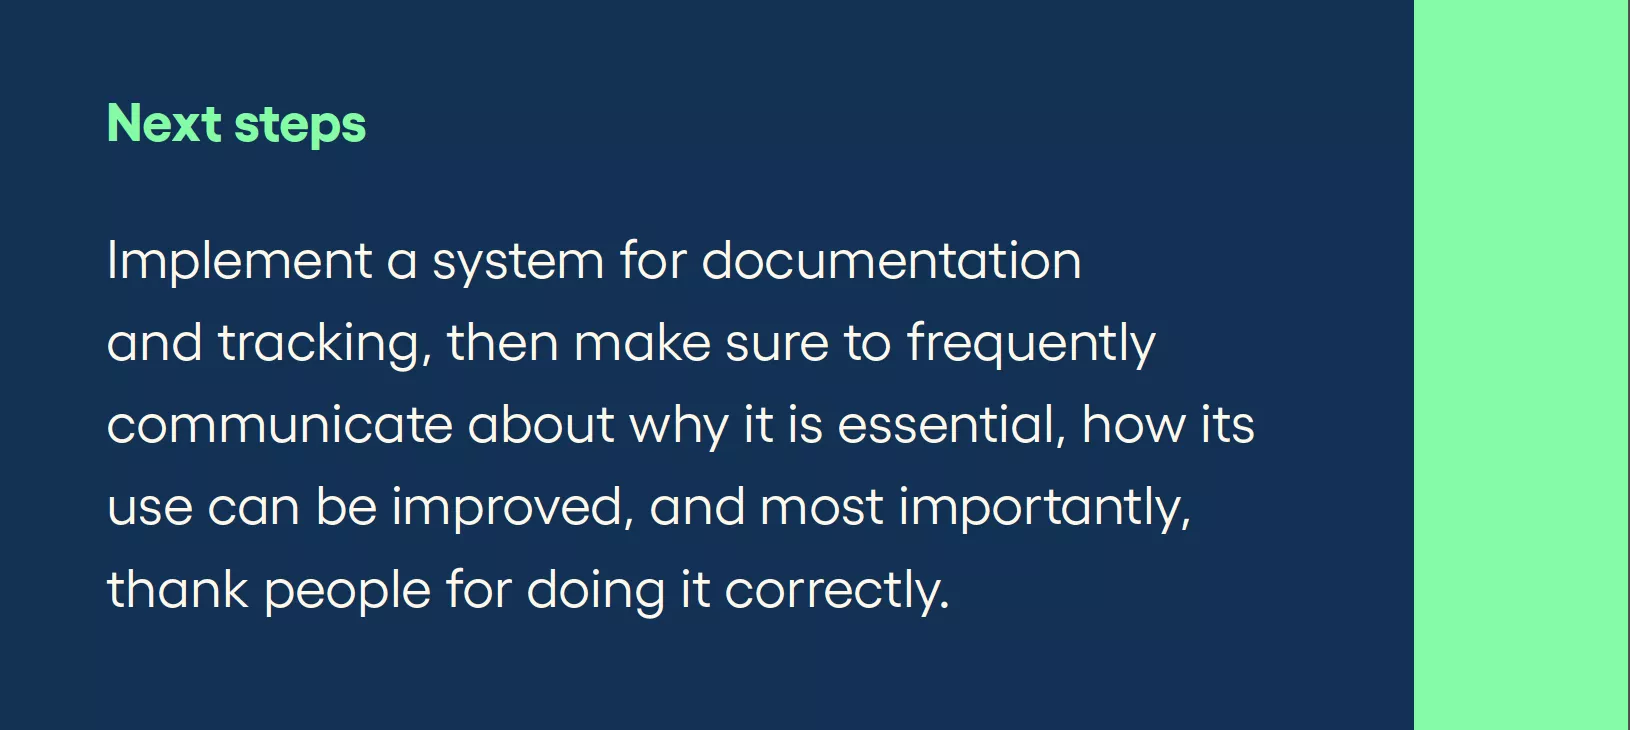 Next steps Implement a system for documentation and tracking, then make sure to frequently communicate about why it is essential, how its use can be improved, and most importantly, thank people for doing it correctly.